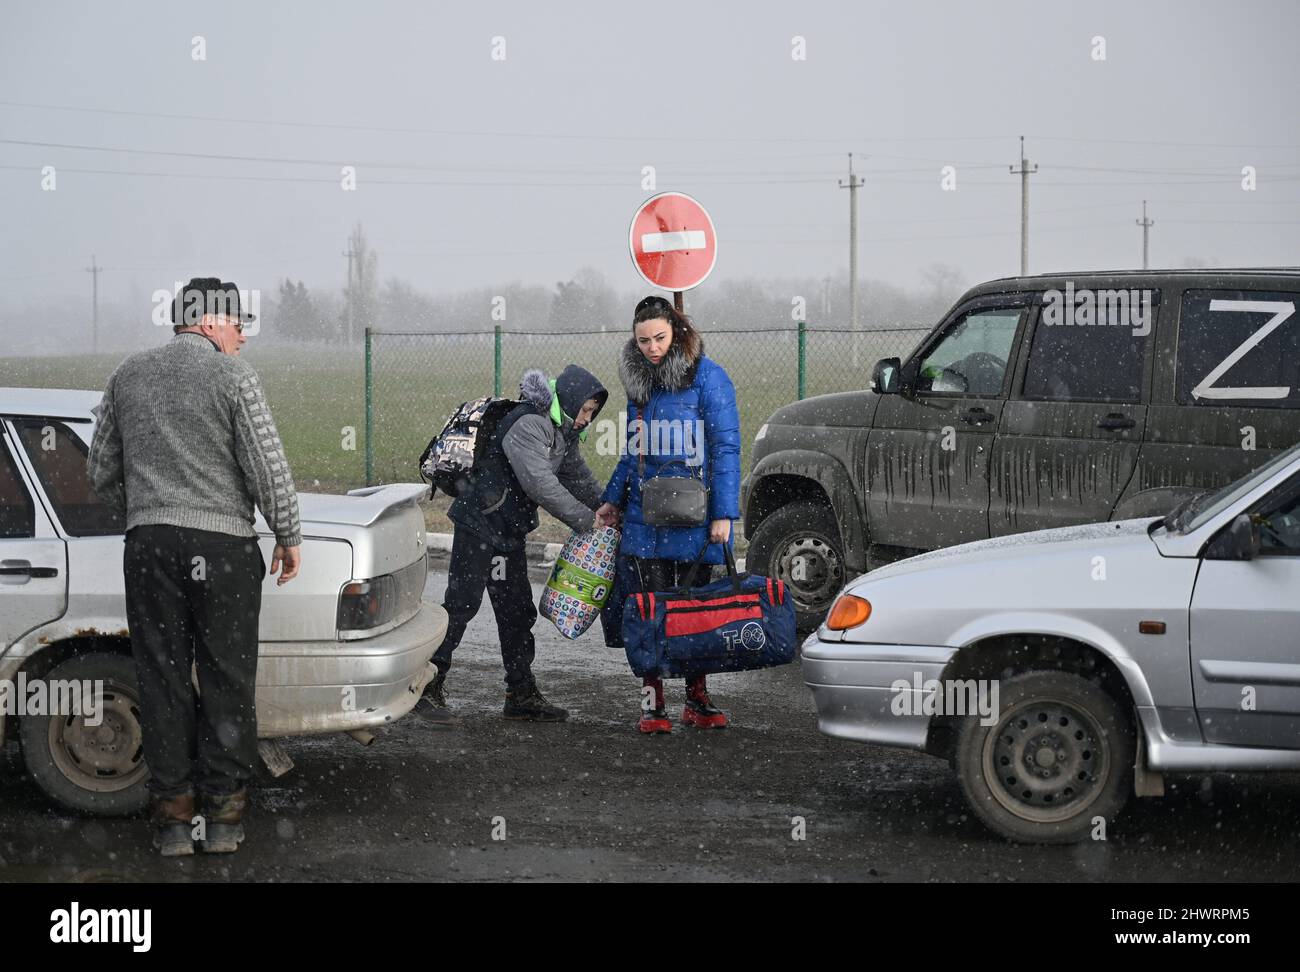 People arrive at the Veselo-Voznesenka border crossing after fleeing from Ukraine to Russia during Ukraine-Russia conflict, in the Rostov region, Russia March 7, 2022. REUTERS/REUTERS PHOTOGRAPHER Stock Photo